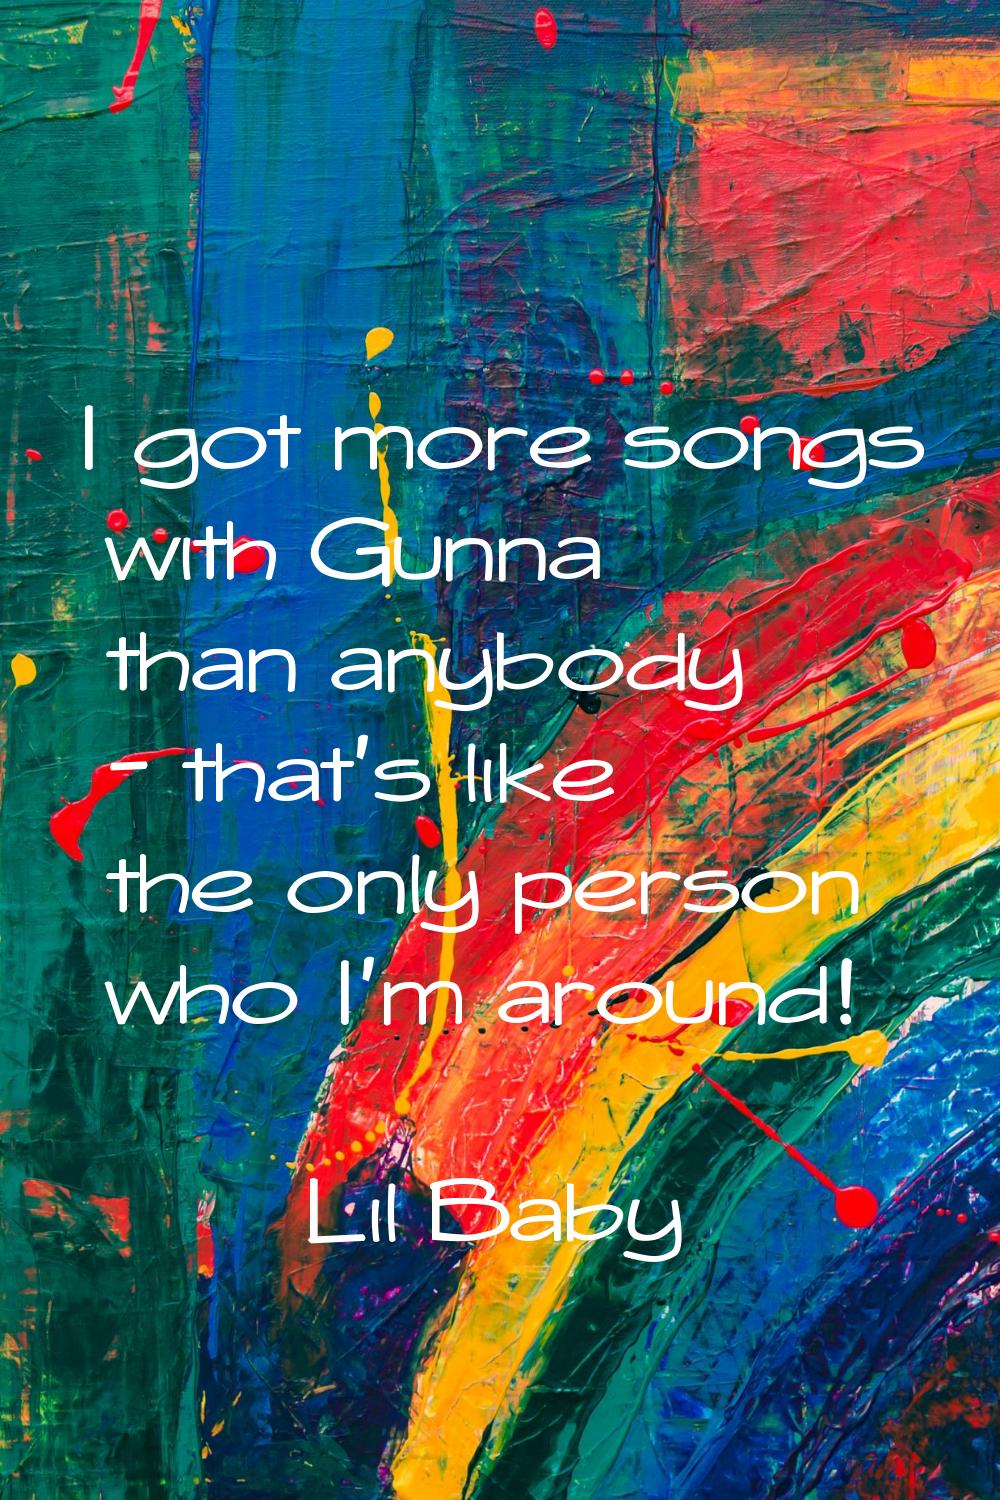 I got more songs with Gunna than anybody - that's like the only person who I'm around!